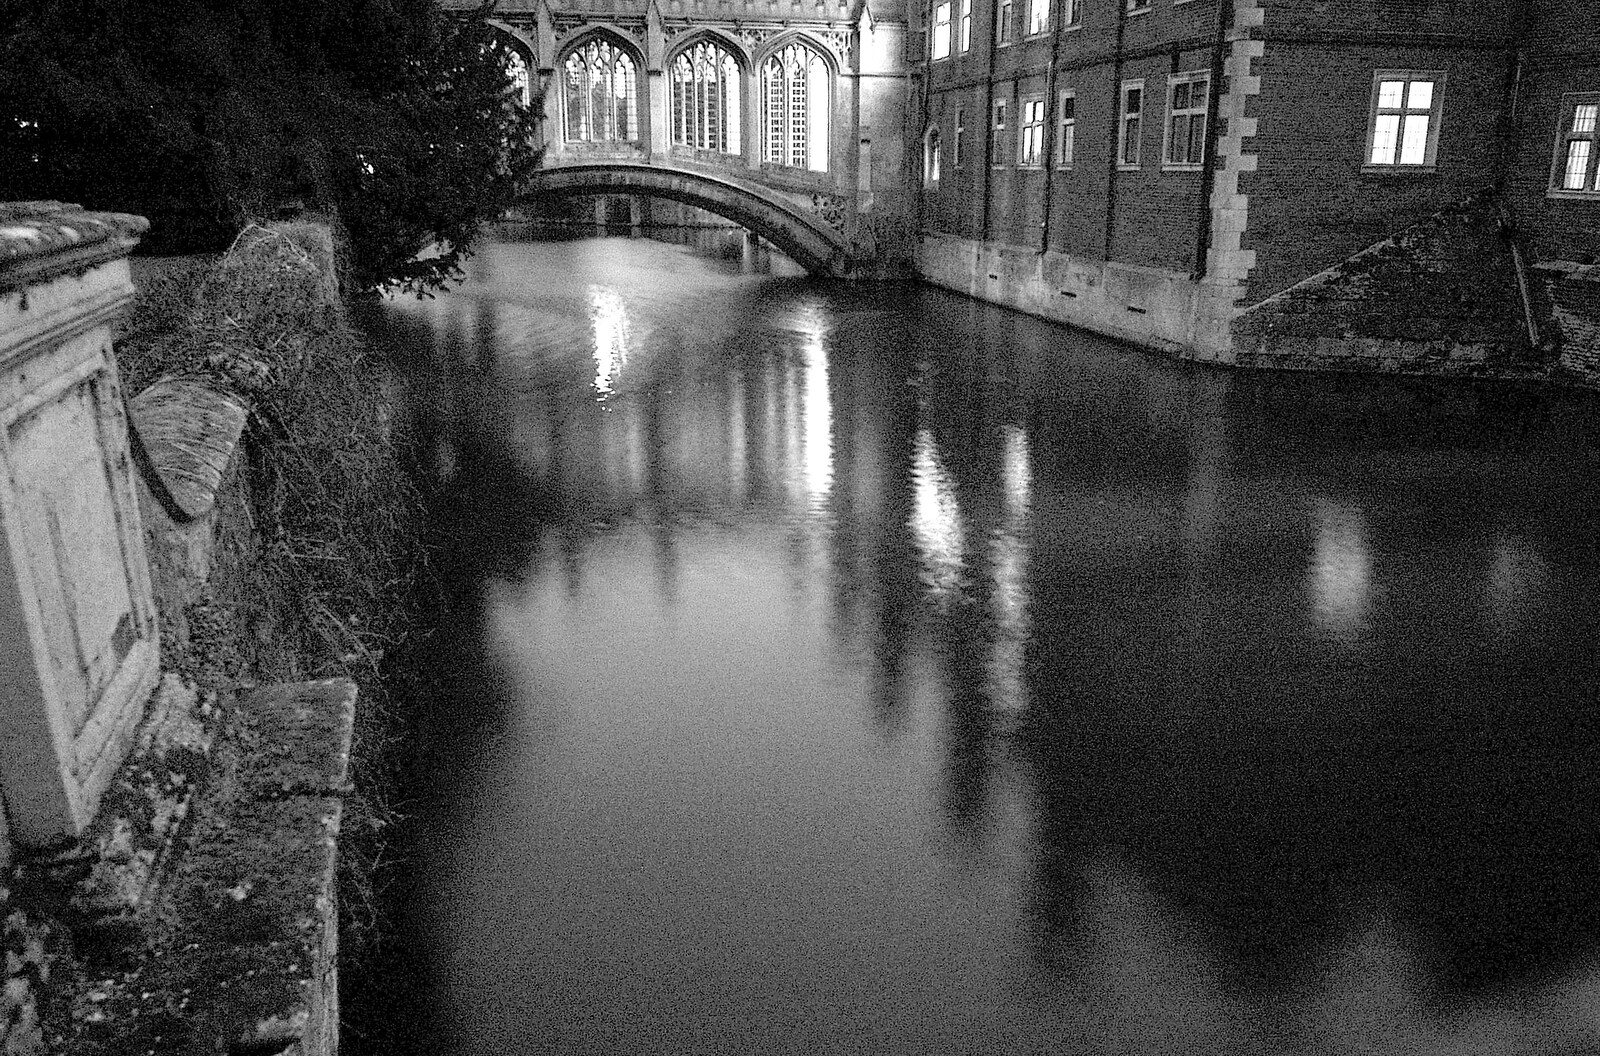 The Bridge of Sighs at St John's College from Wrecked Cars, A Night Out and Stick Game in the Cherry Tree, Cambridge and Yaxley, Suffolk- 24th February 2006